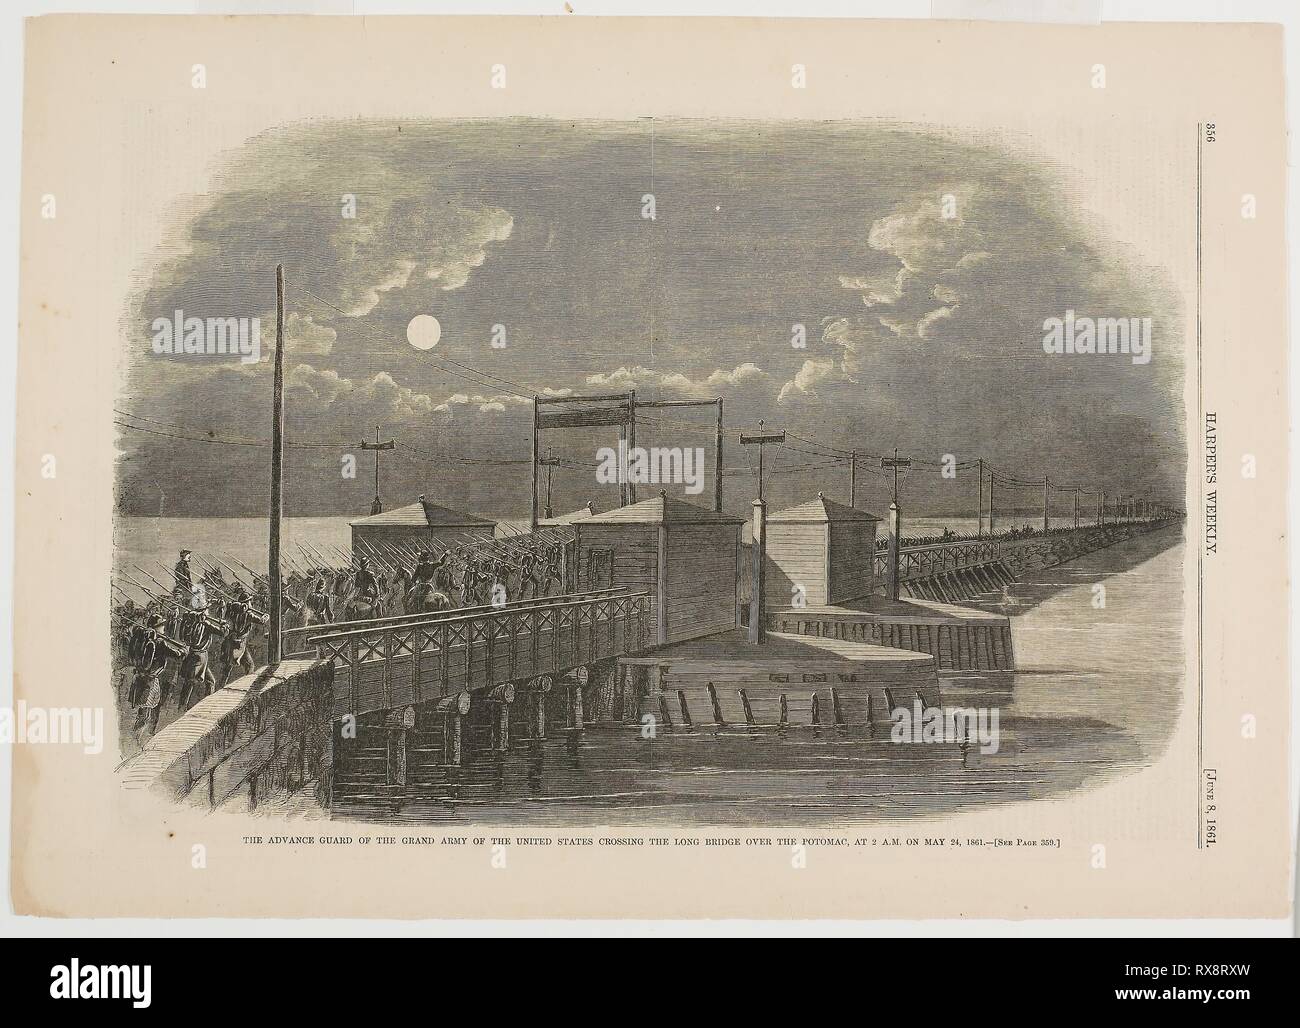 The Advance Guard of the Grand Army of the United States Crossing the Long Bridge over the Potomac at 2 A.M. on May 24, 1861. Winslow Homer (American, 1836-1910); published by Harper's Weekly (American, 1857-1916). Date: 1861. Dimensions: 232 x 352 mm (image); 295 x 407 mm (sheet). Wood engraving on paper. Origin: United States. Museum: The Chicago Art Institute. Stock Photo